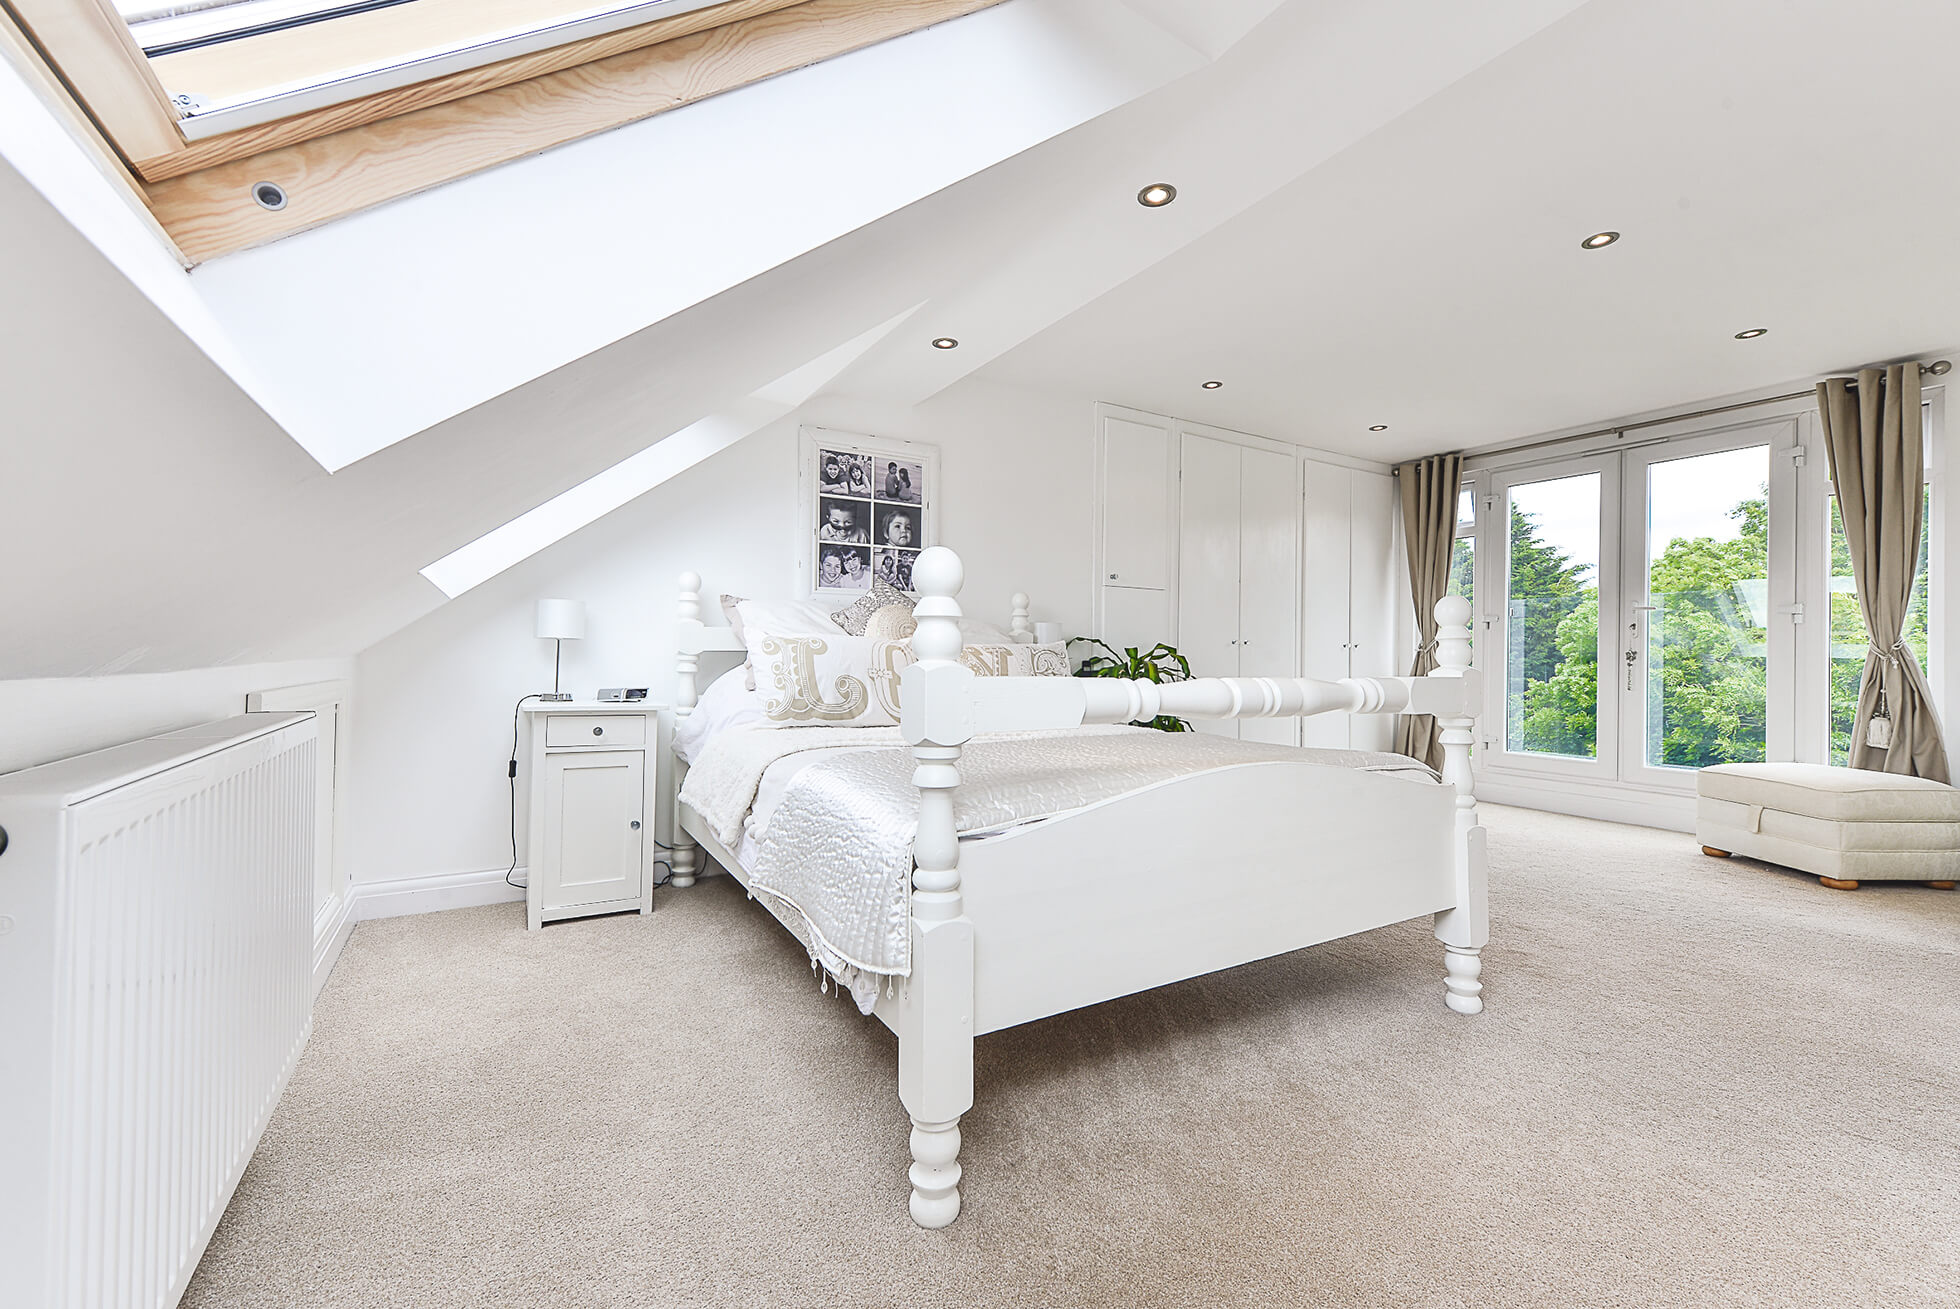 Do you have a question about converting your Loft in Ayot Green? Here are the most popular questions asked by our clients.